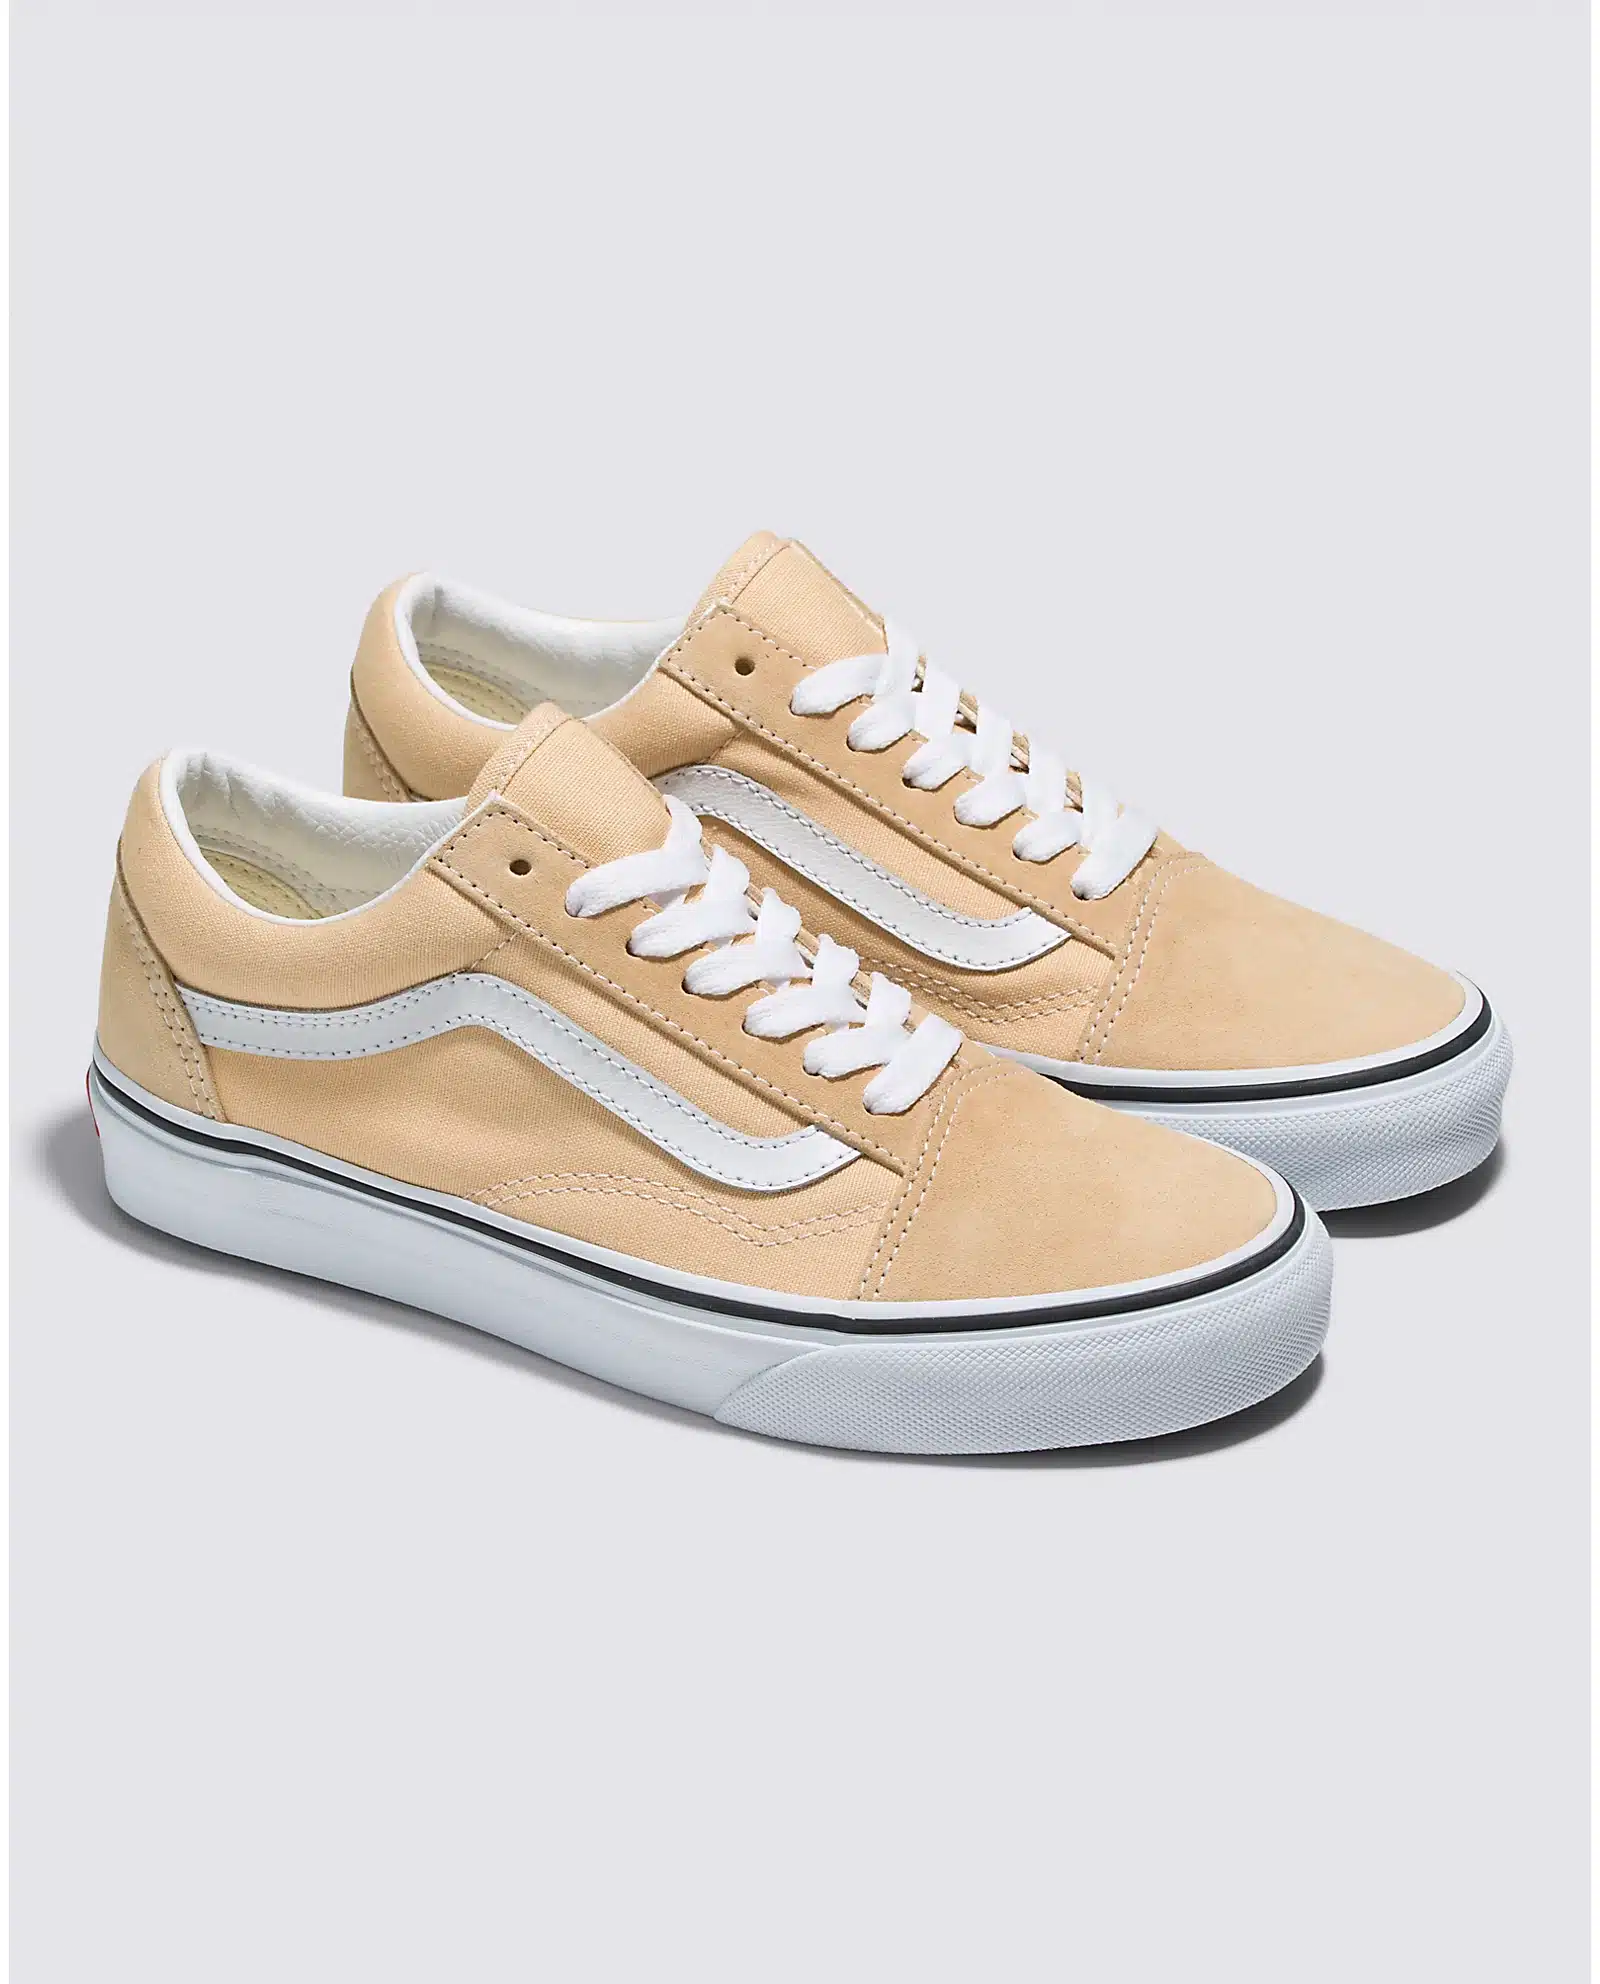 Vans Shoe Sale - Extra 30% Off FREE Shipping Right Now! - Thrifty NW Mom